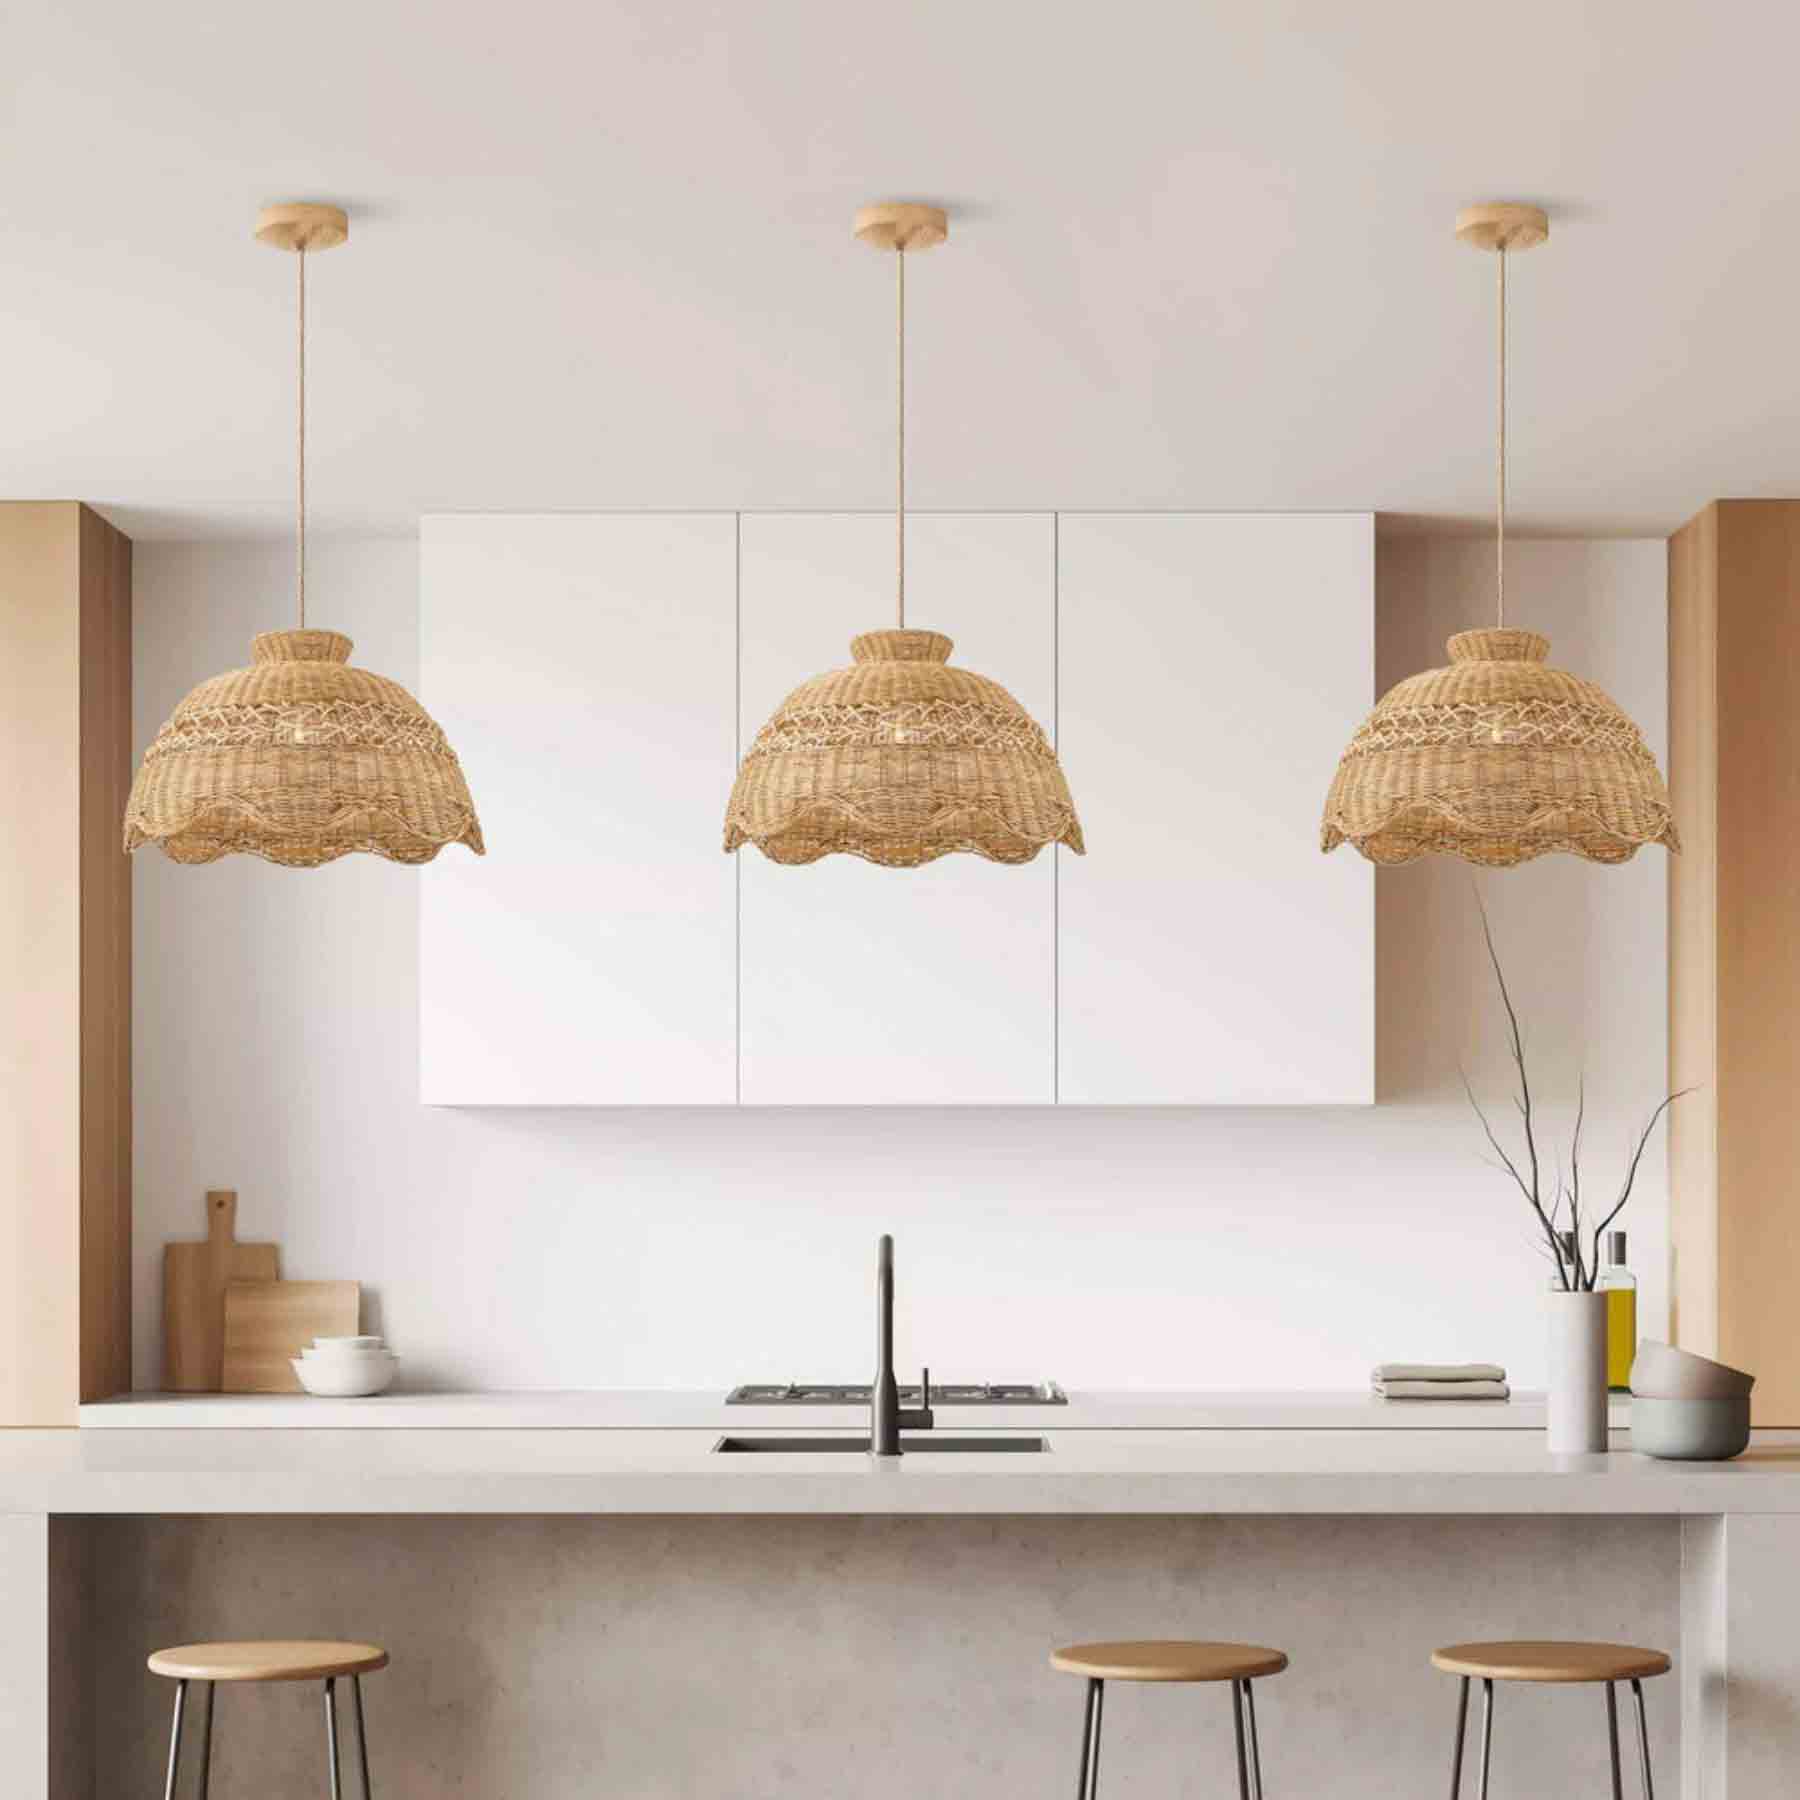 this beautiful lighting fixtures can be considered as a delicate flower in full bloom